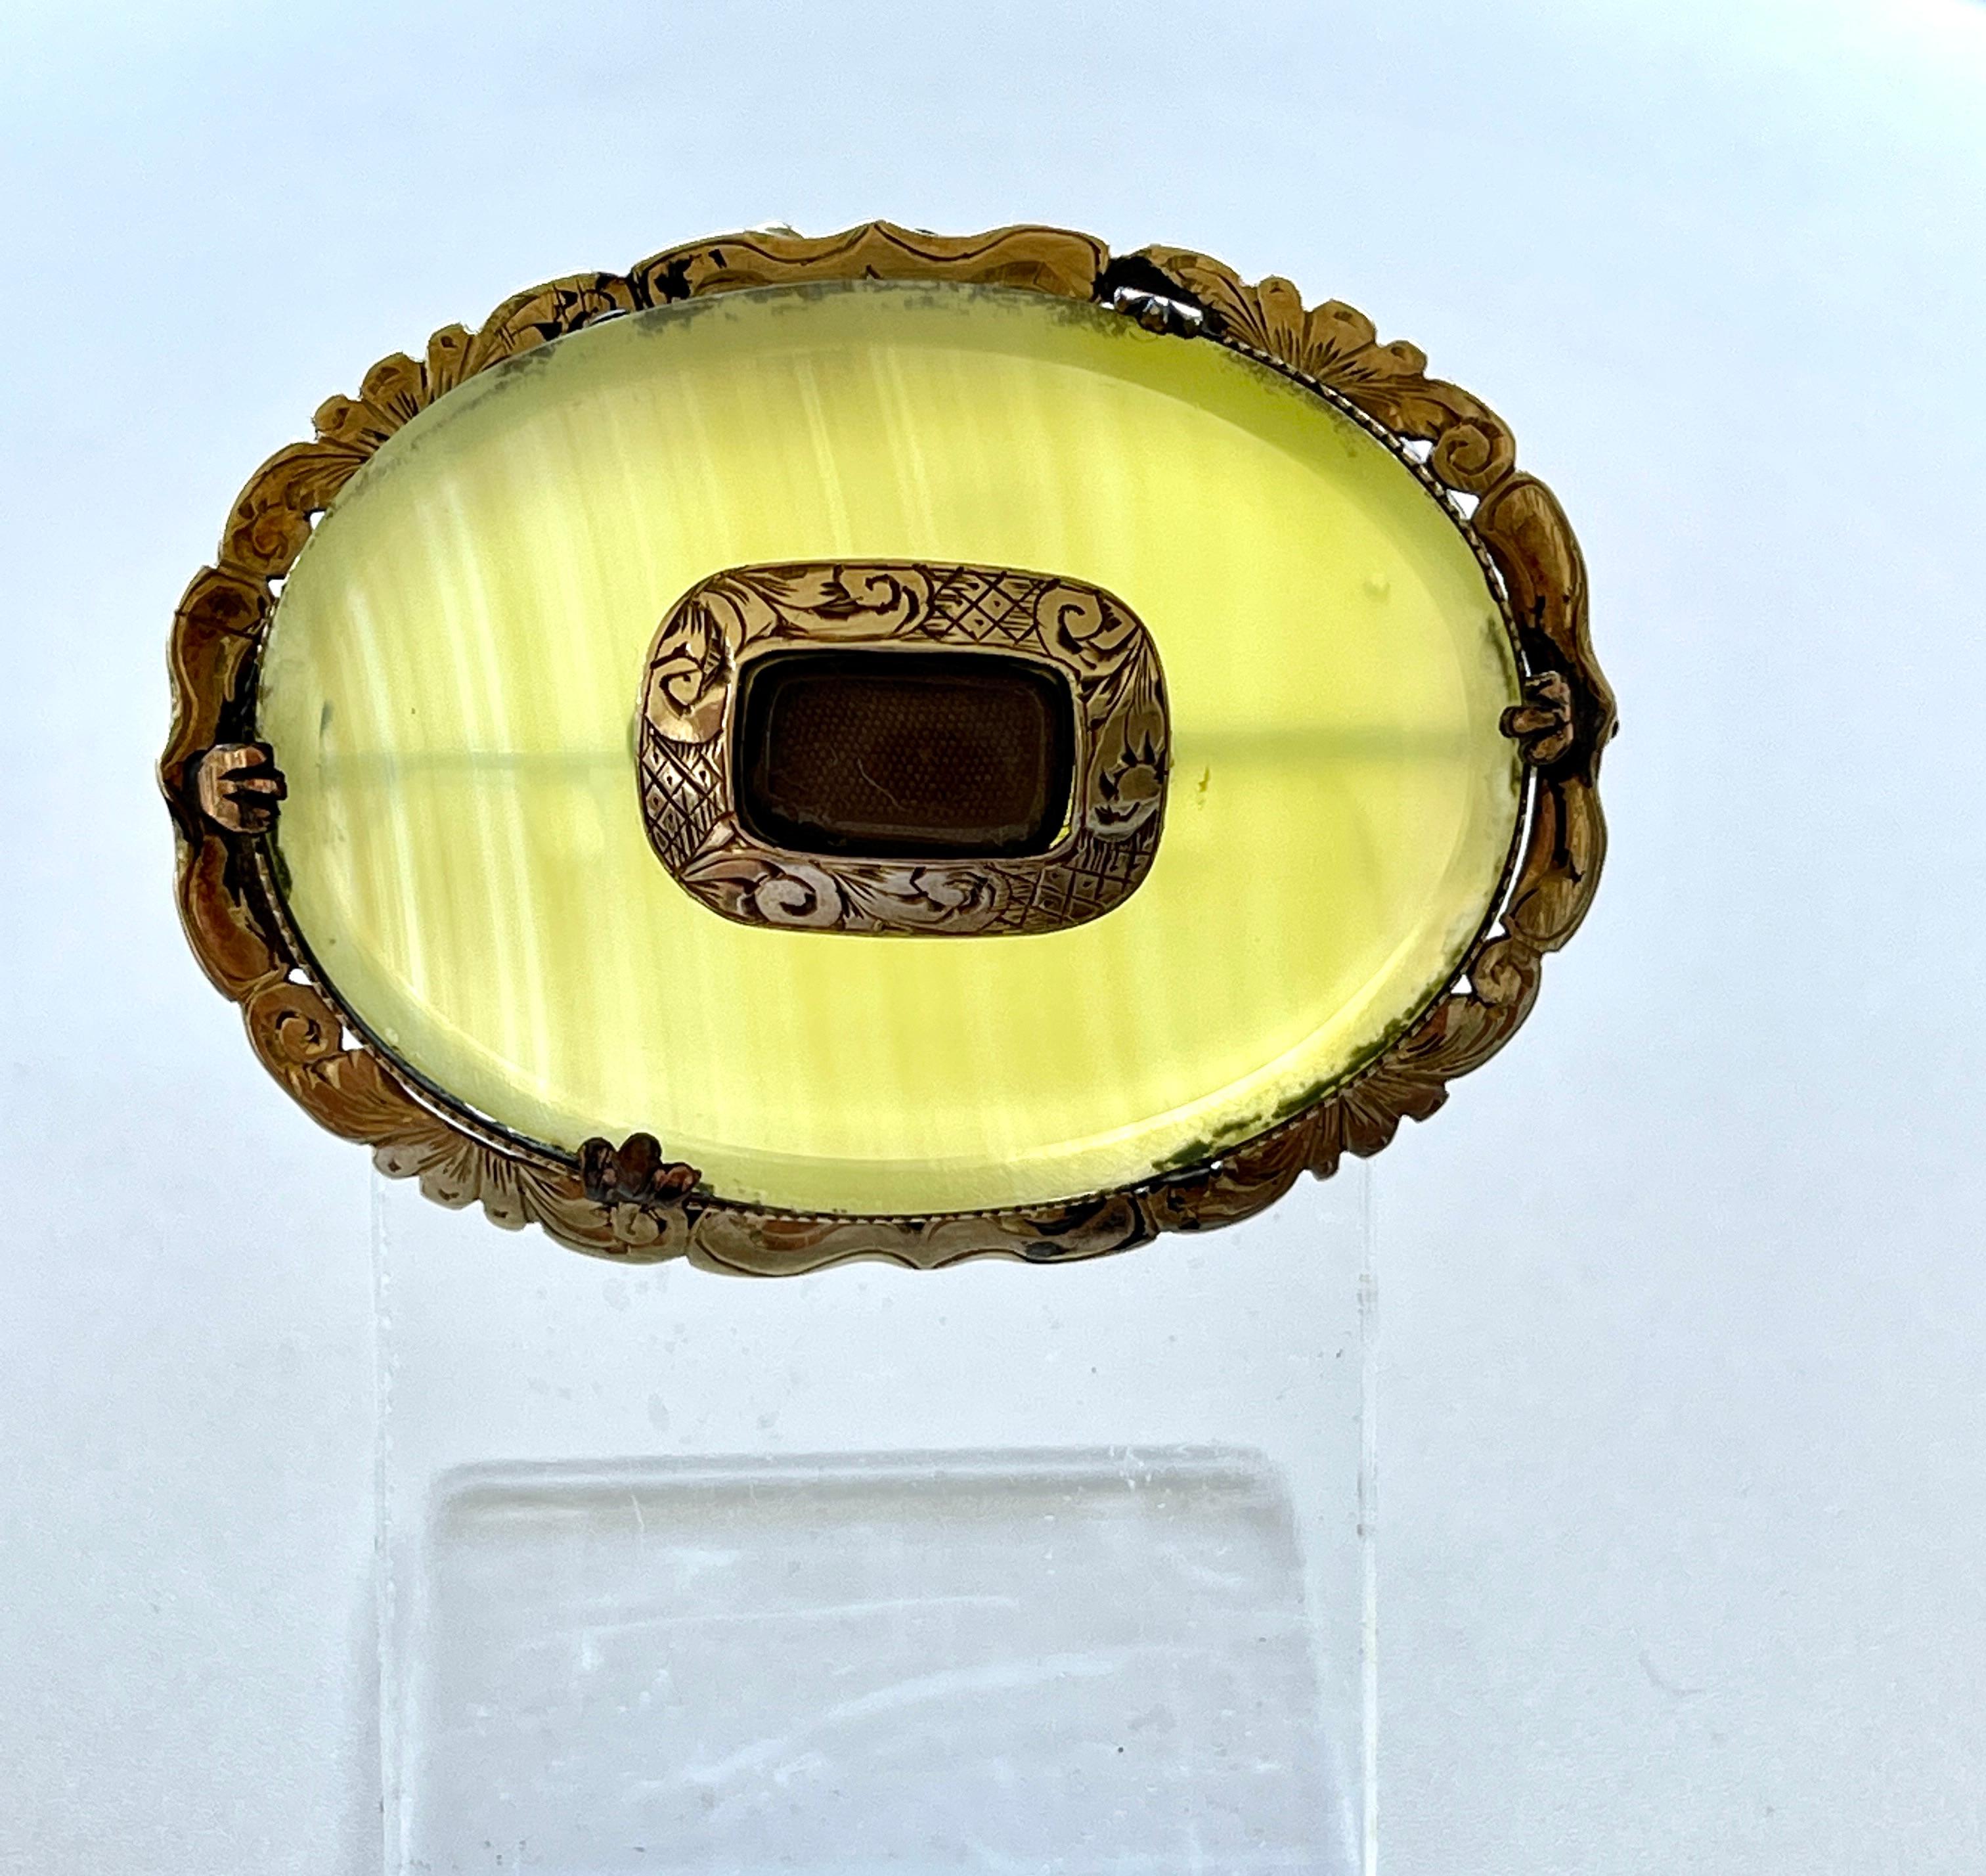 Antique Victorian 9ct Gold Agate Mourning Brooch

This brooch features unusual, lemon coloured, banded Agate which is transparent and very attractive.  
It is set in 9ct yellow gold (acid tested) with scrolling frame work and beautiful, hand